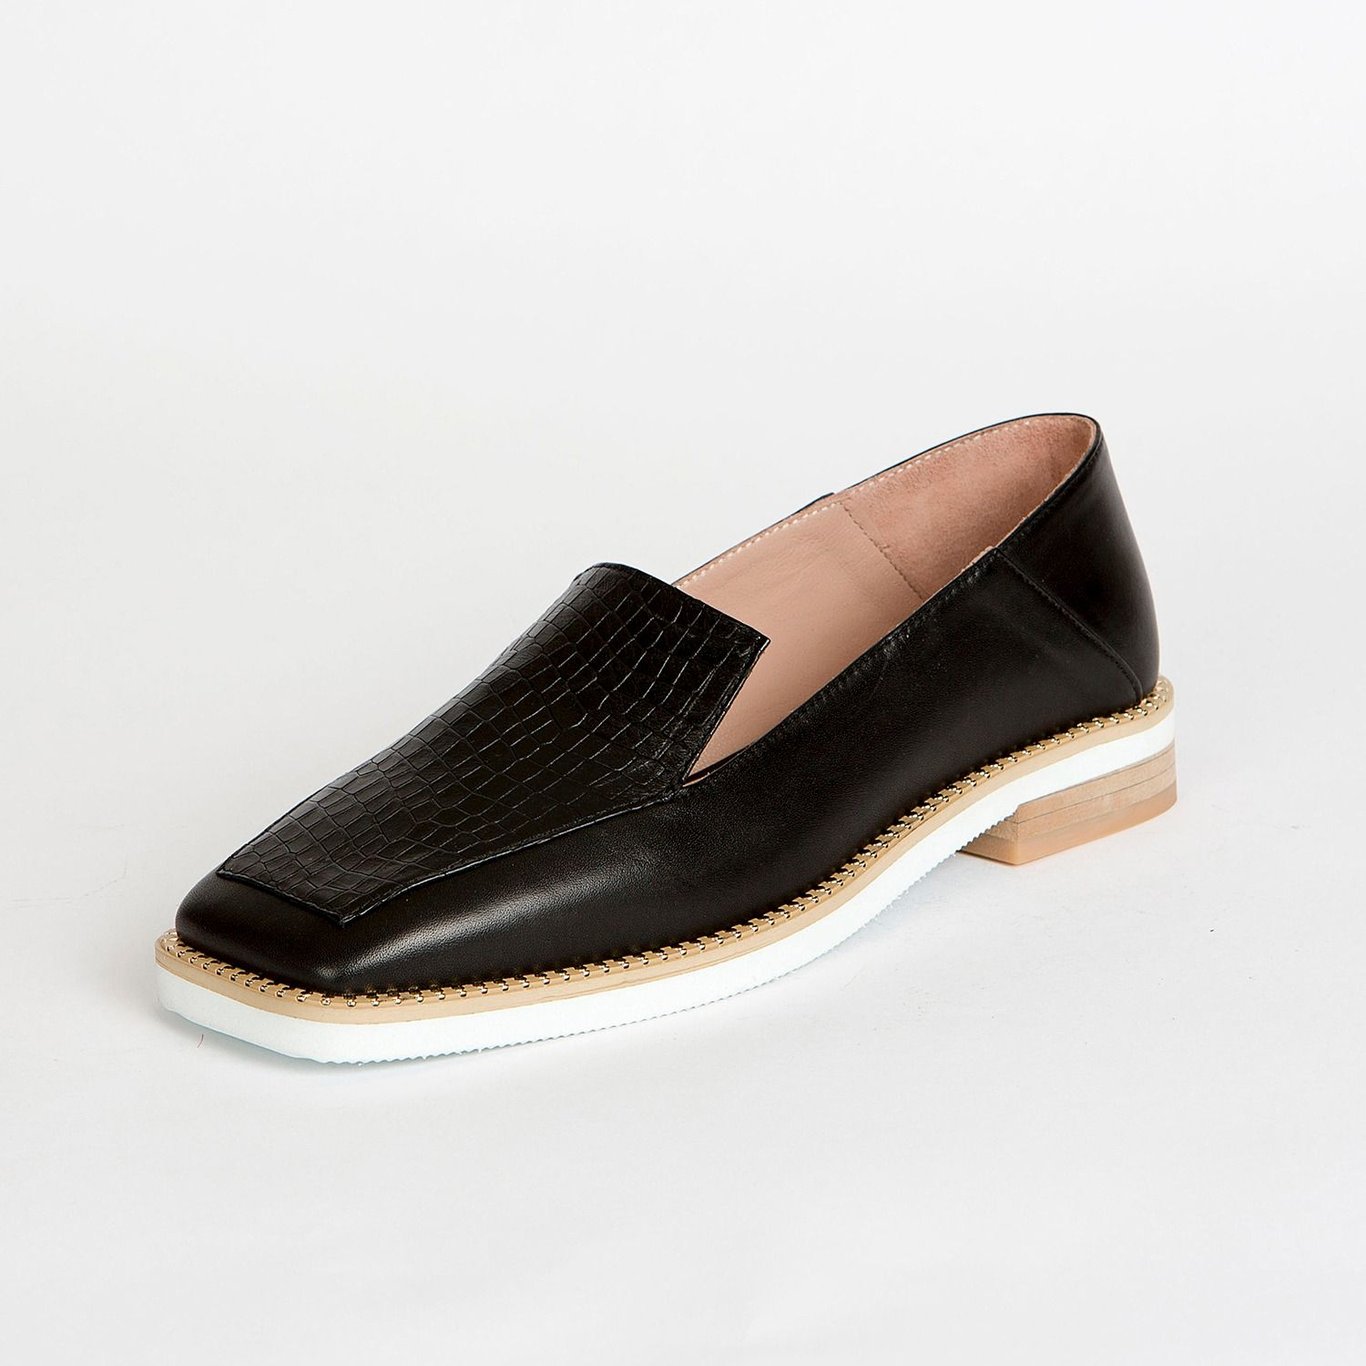 bicolor leather comfort shoes